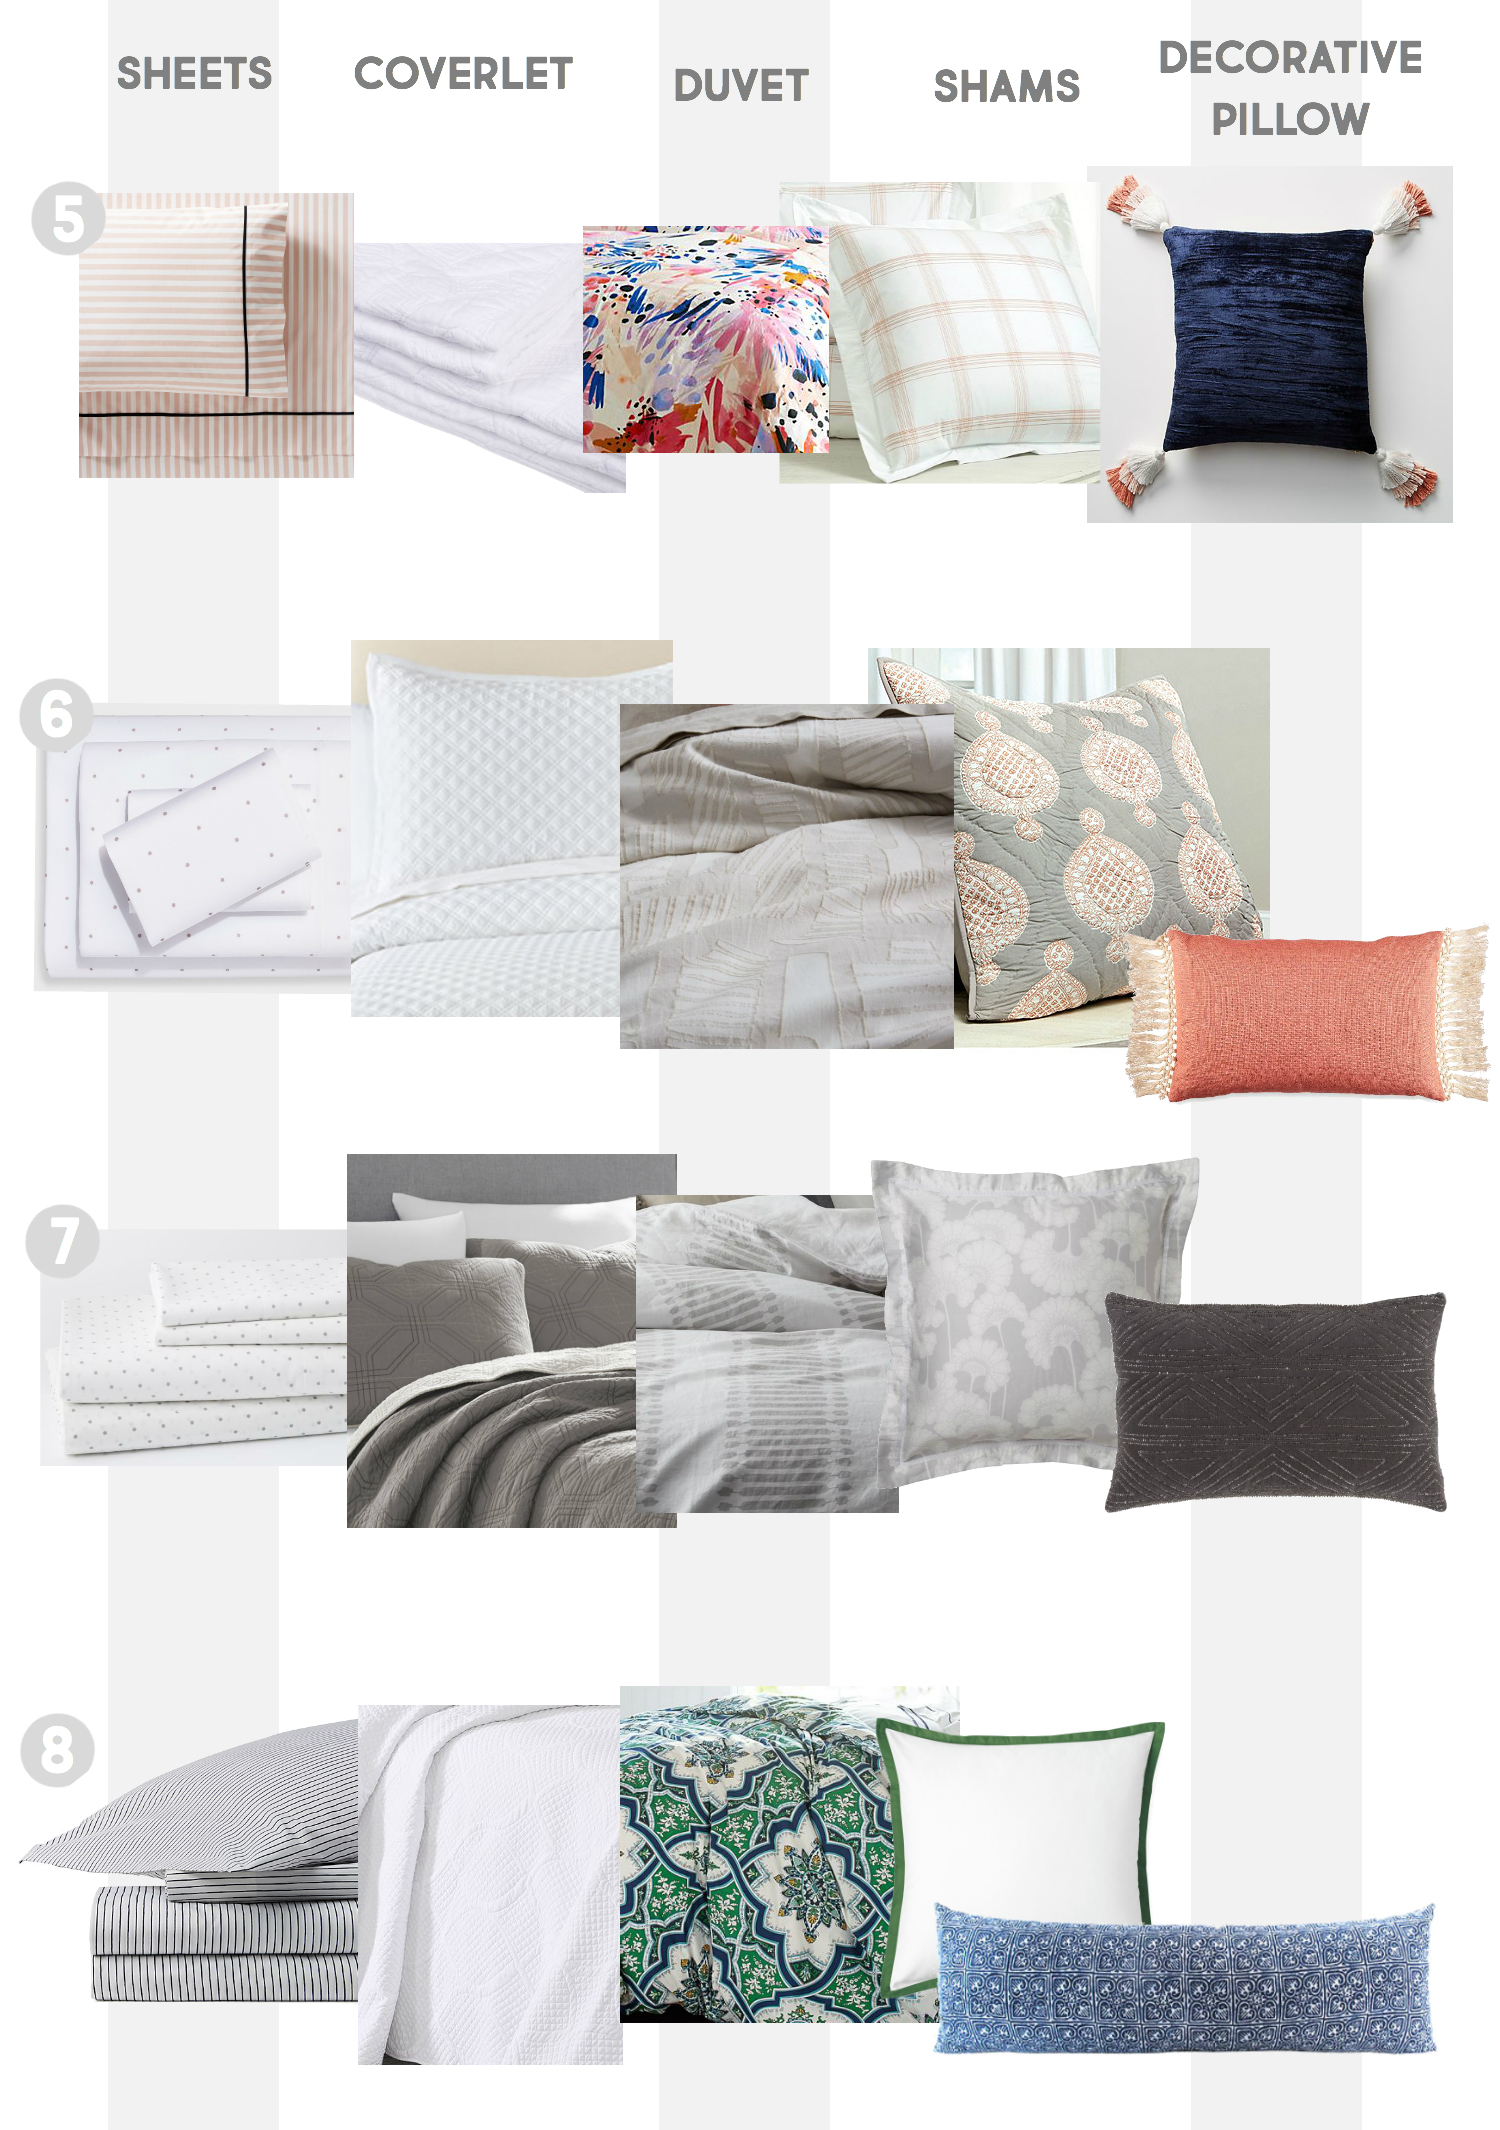 How to Mix Bedding 2 Cate Holcombe Interiors